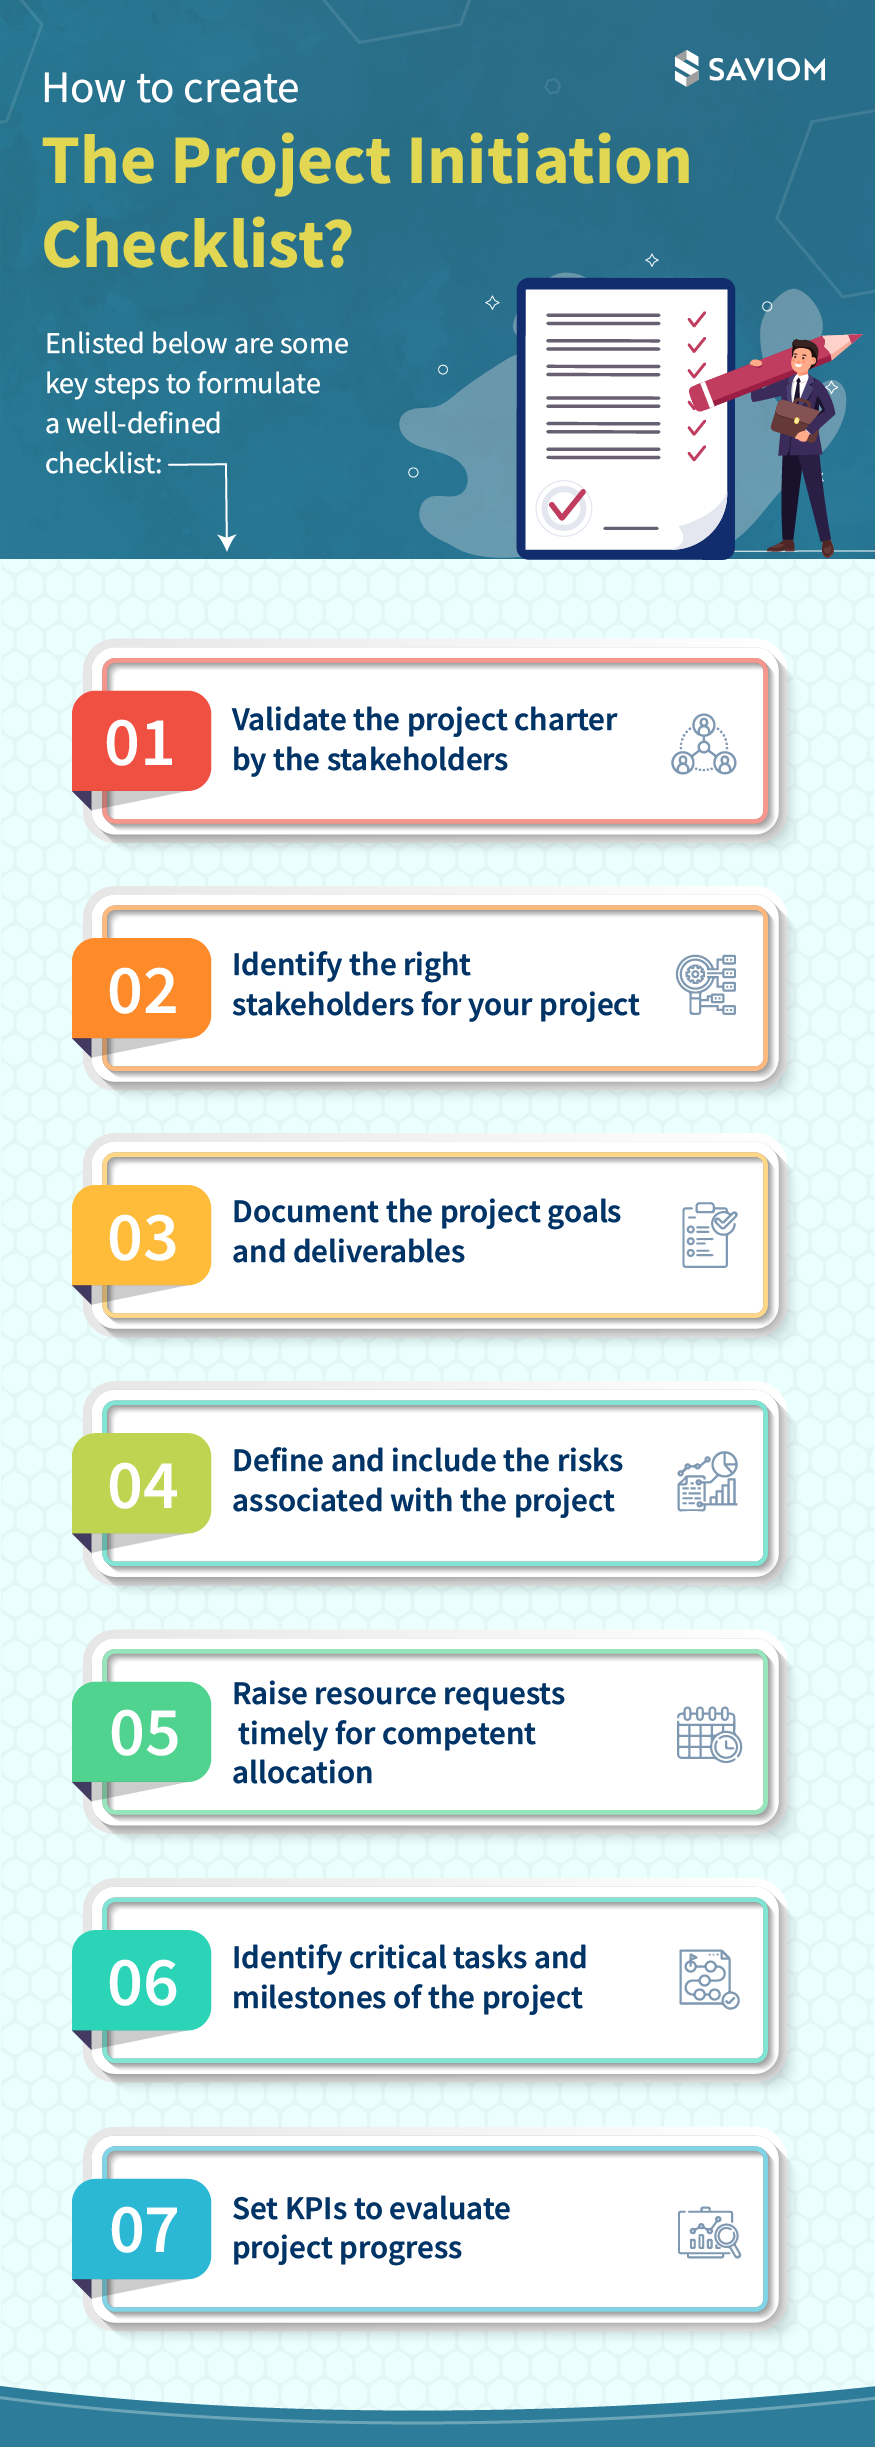  Project Initiation Checklist: Why Is It Important for Successful Delivery?